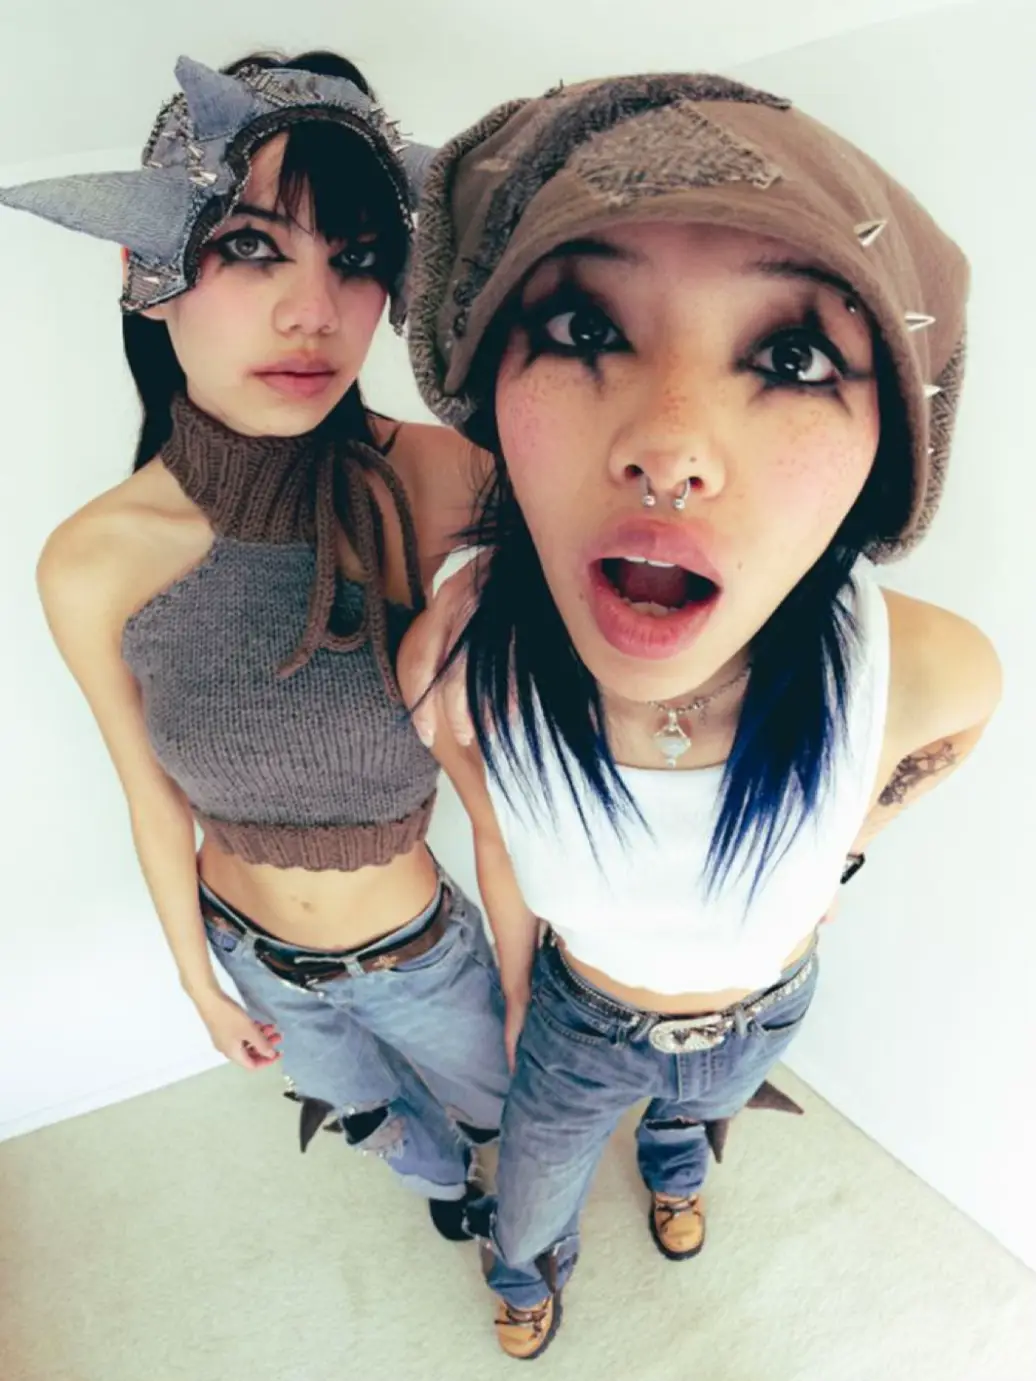  Two women wearing hats and tops.